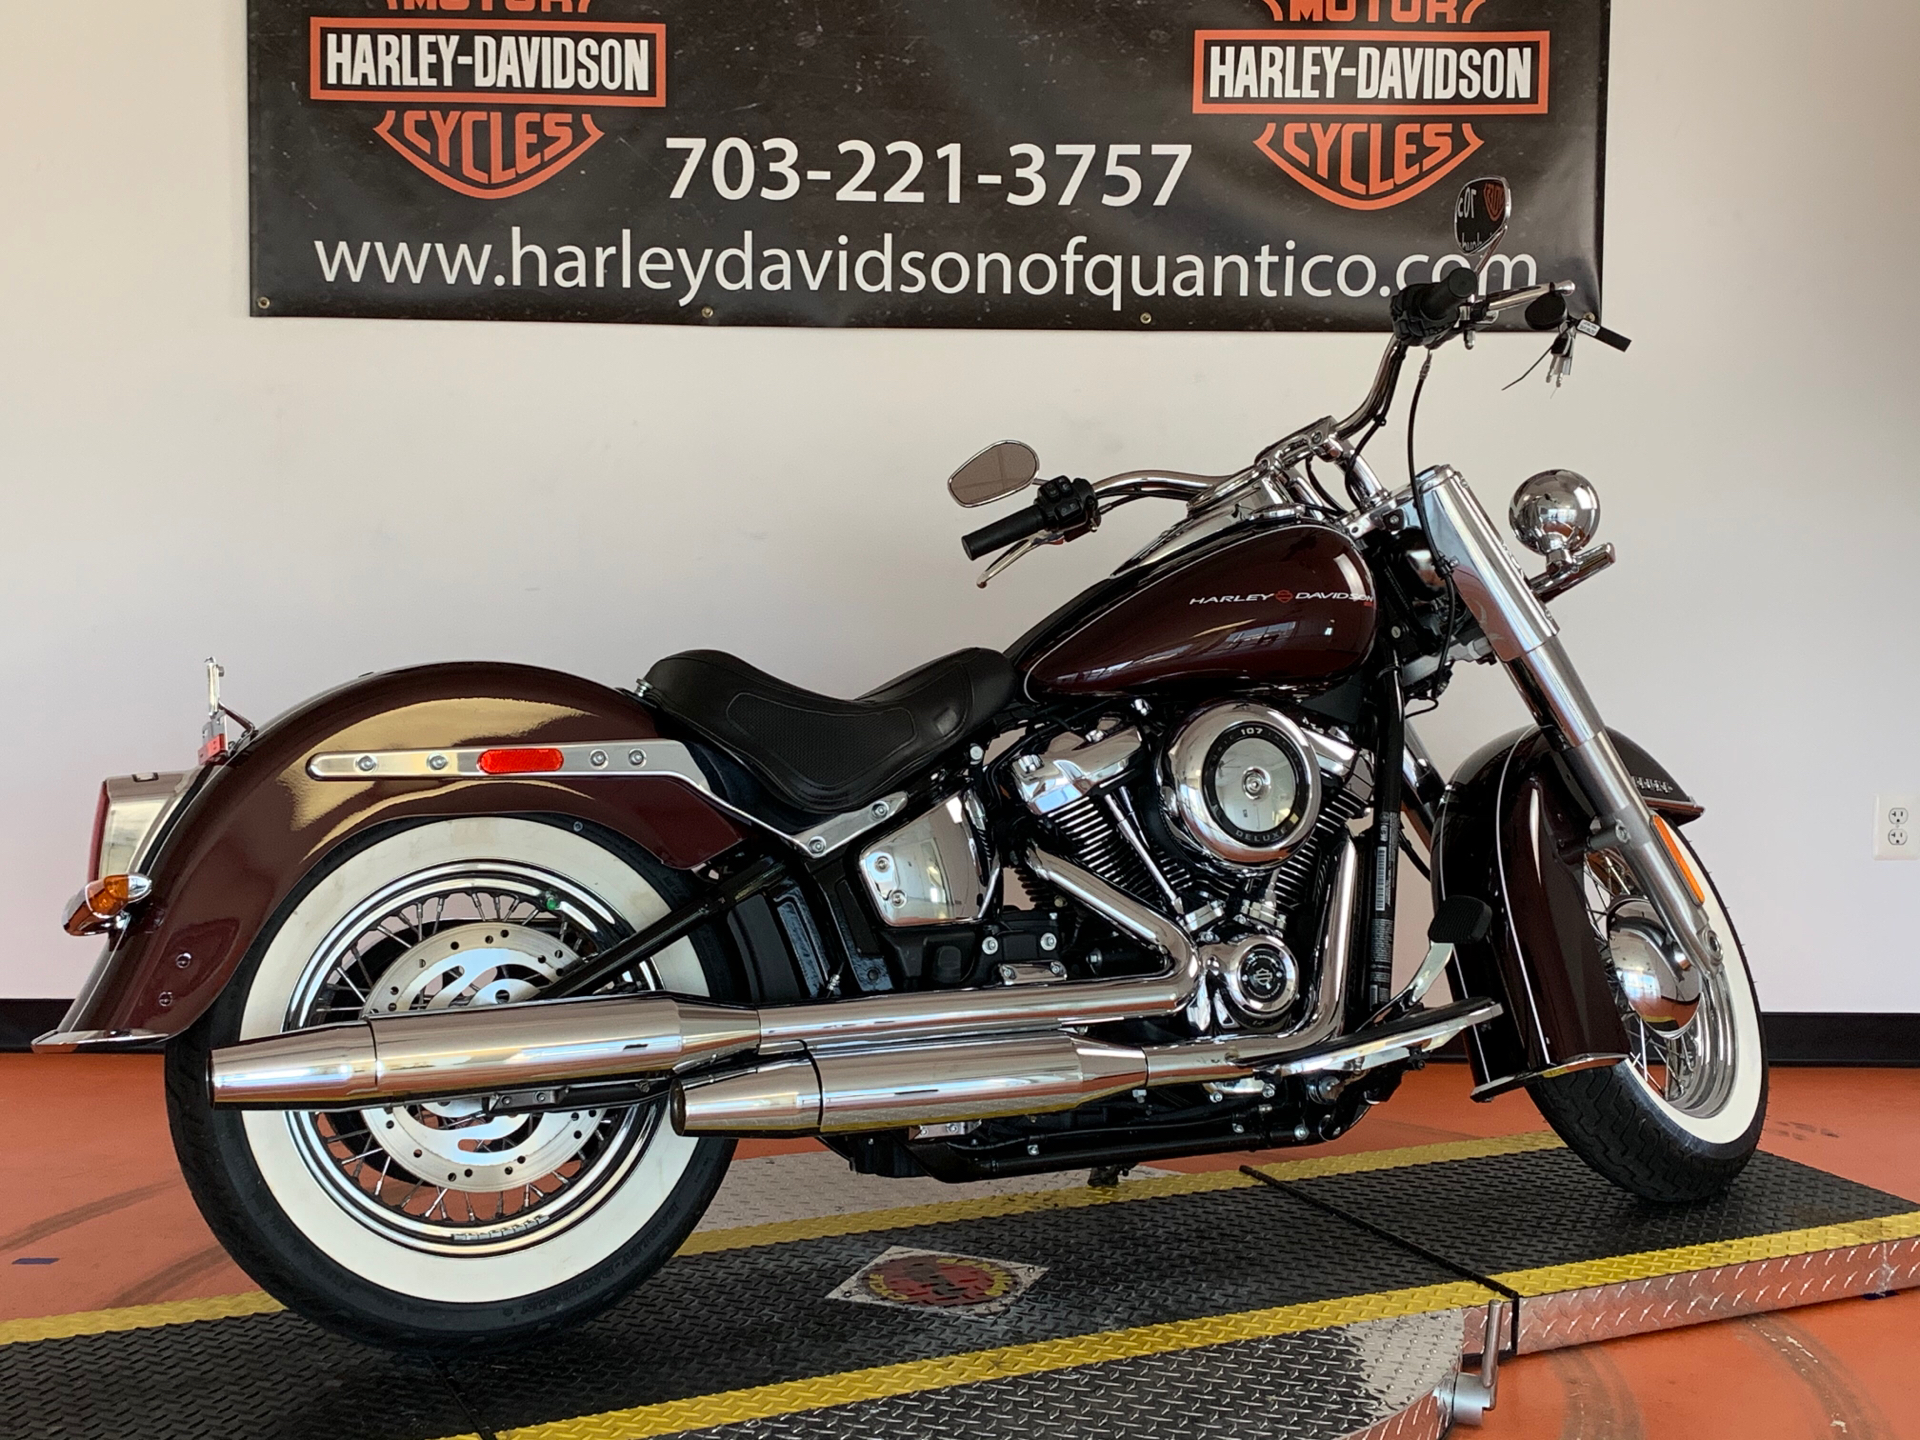 Used 2018 Harley Davidson Softail Deluxe 107 Twisted Cherry Motorcycles In Dumfries Va 080842